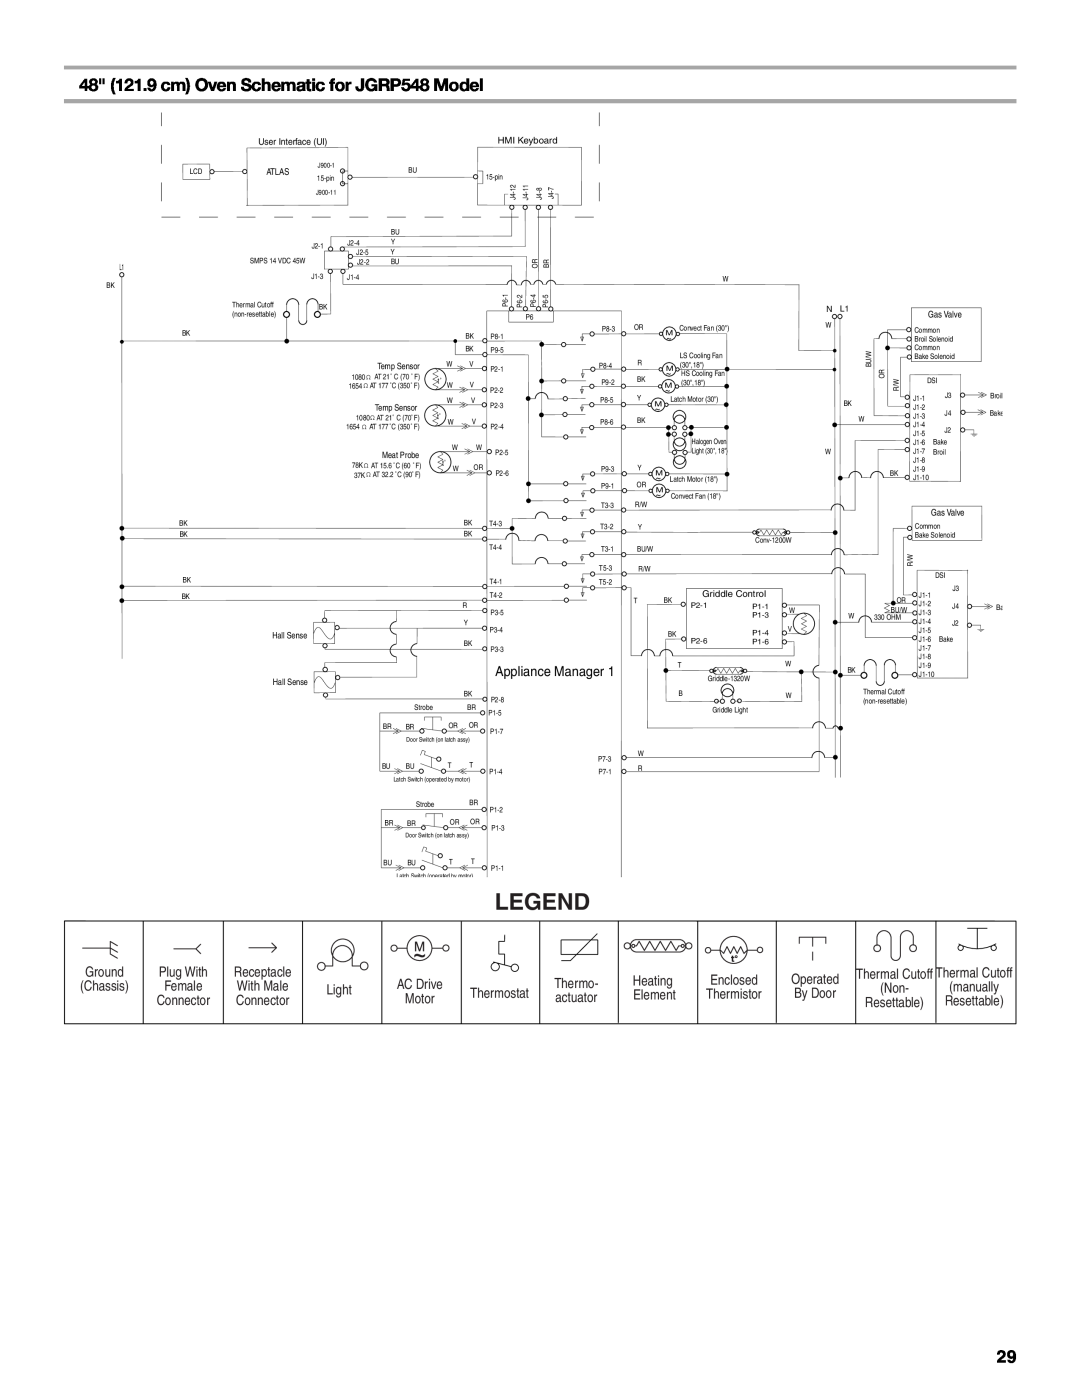 Jenn-Air W10394575A 48 121.9 cm Oven Schematic for JGRP548 Model, Thermostat, Enclosed Thermistor, Operated By Door 